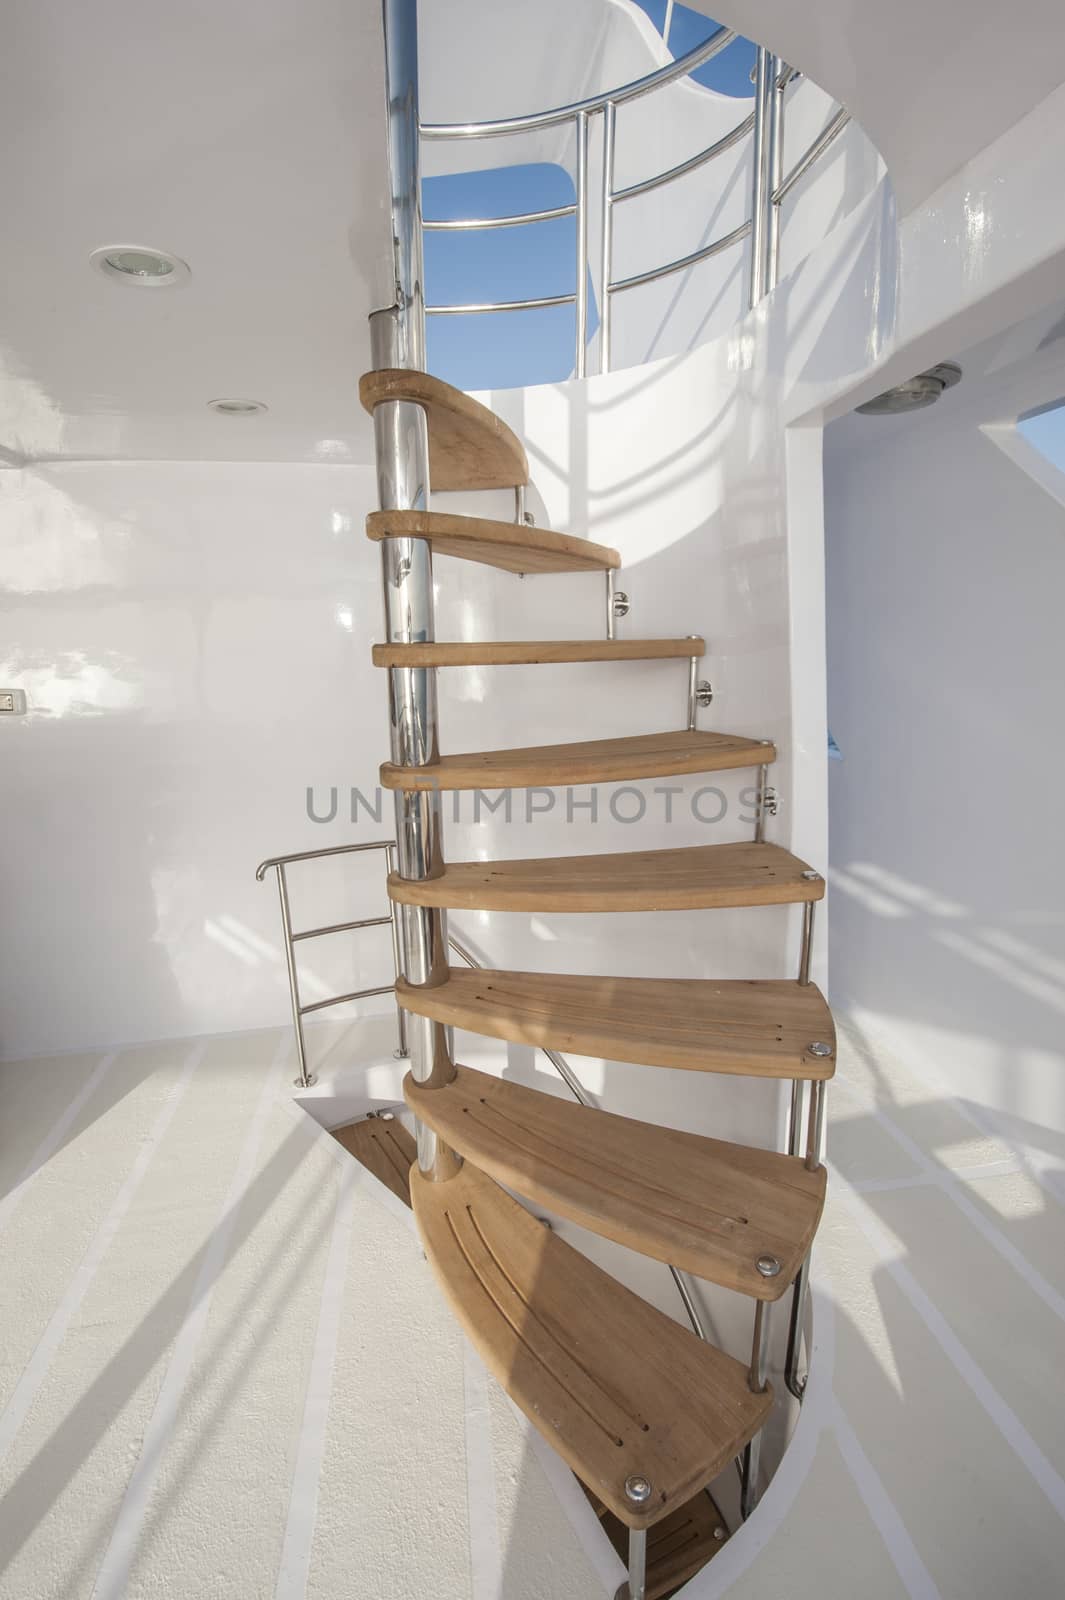 Wooden curved staircase on sundeck area of large luxury motor yacht